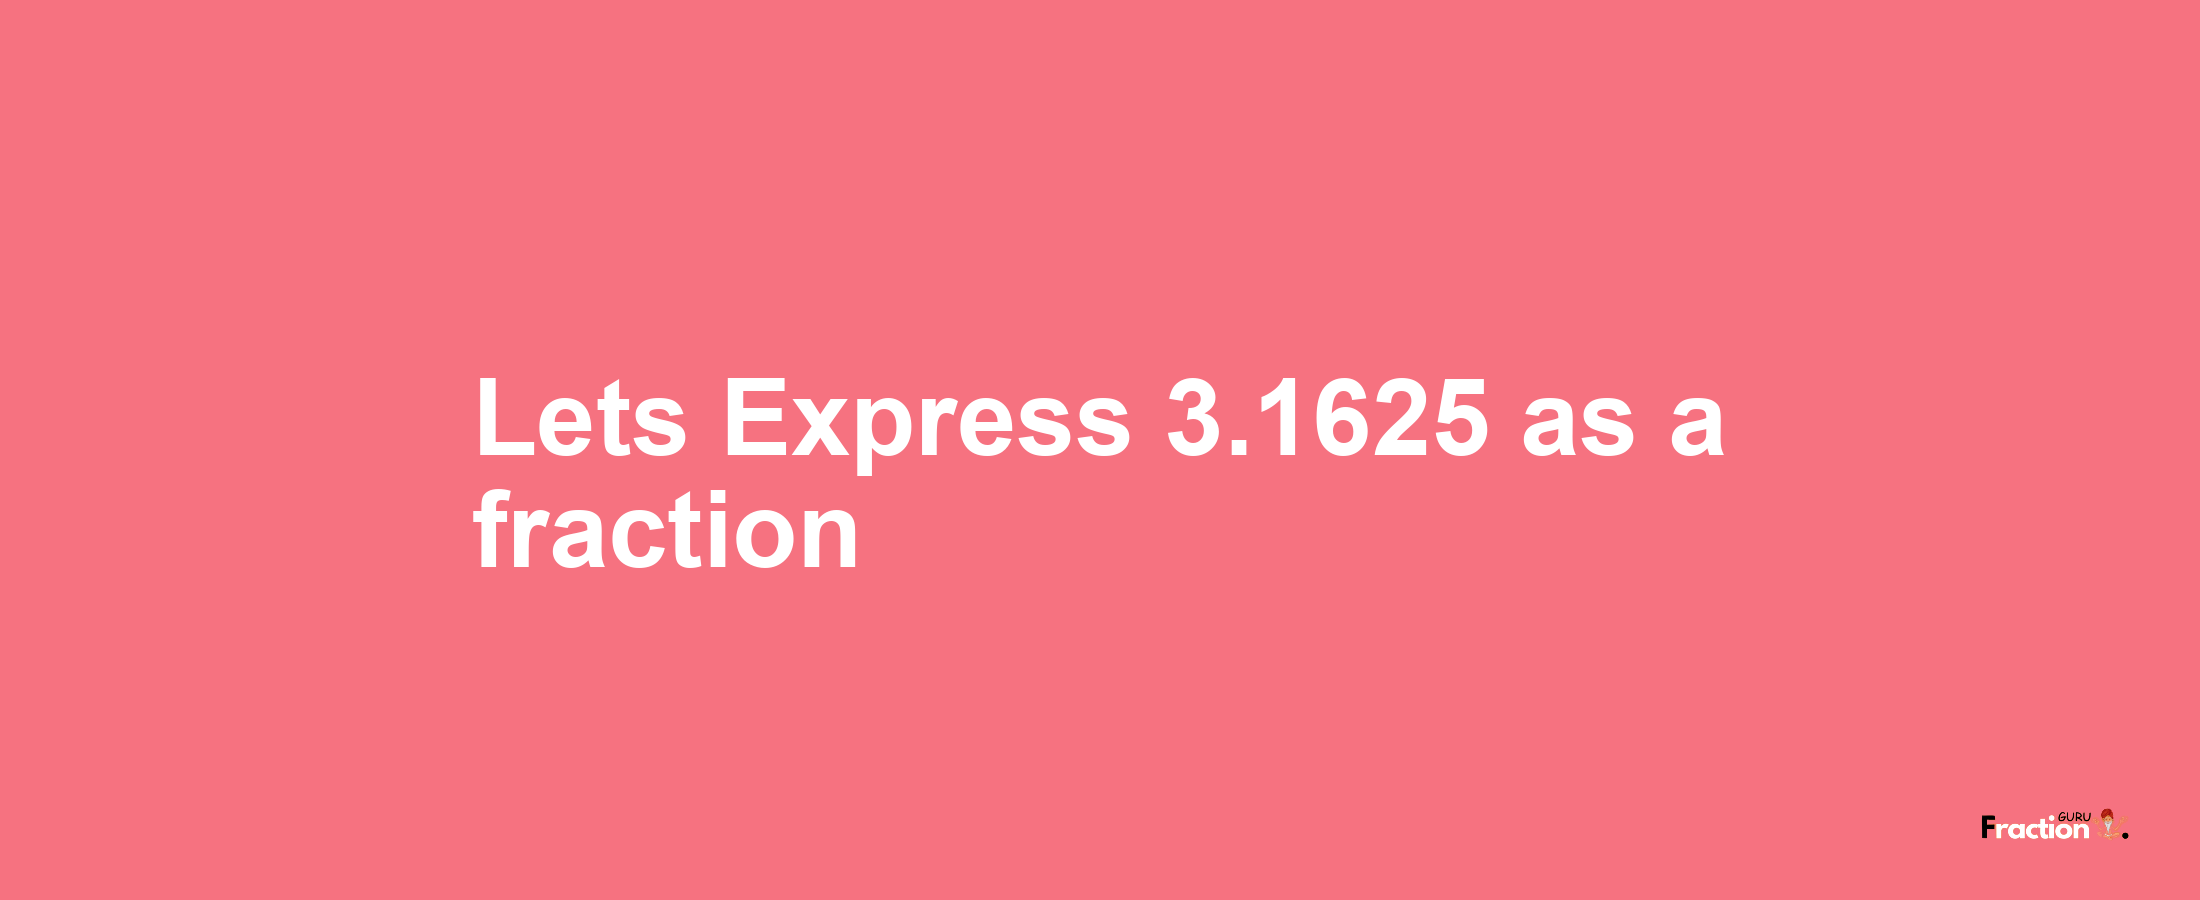 Lets Express 3.1625 as afraction